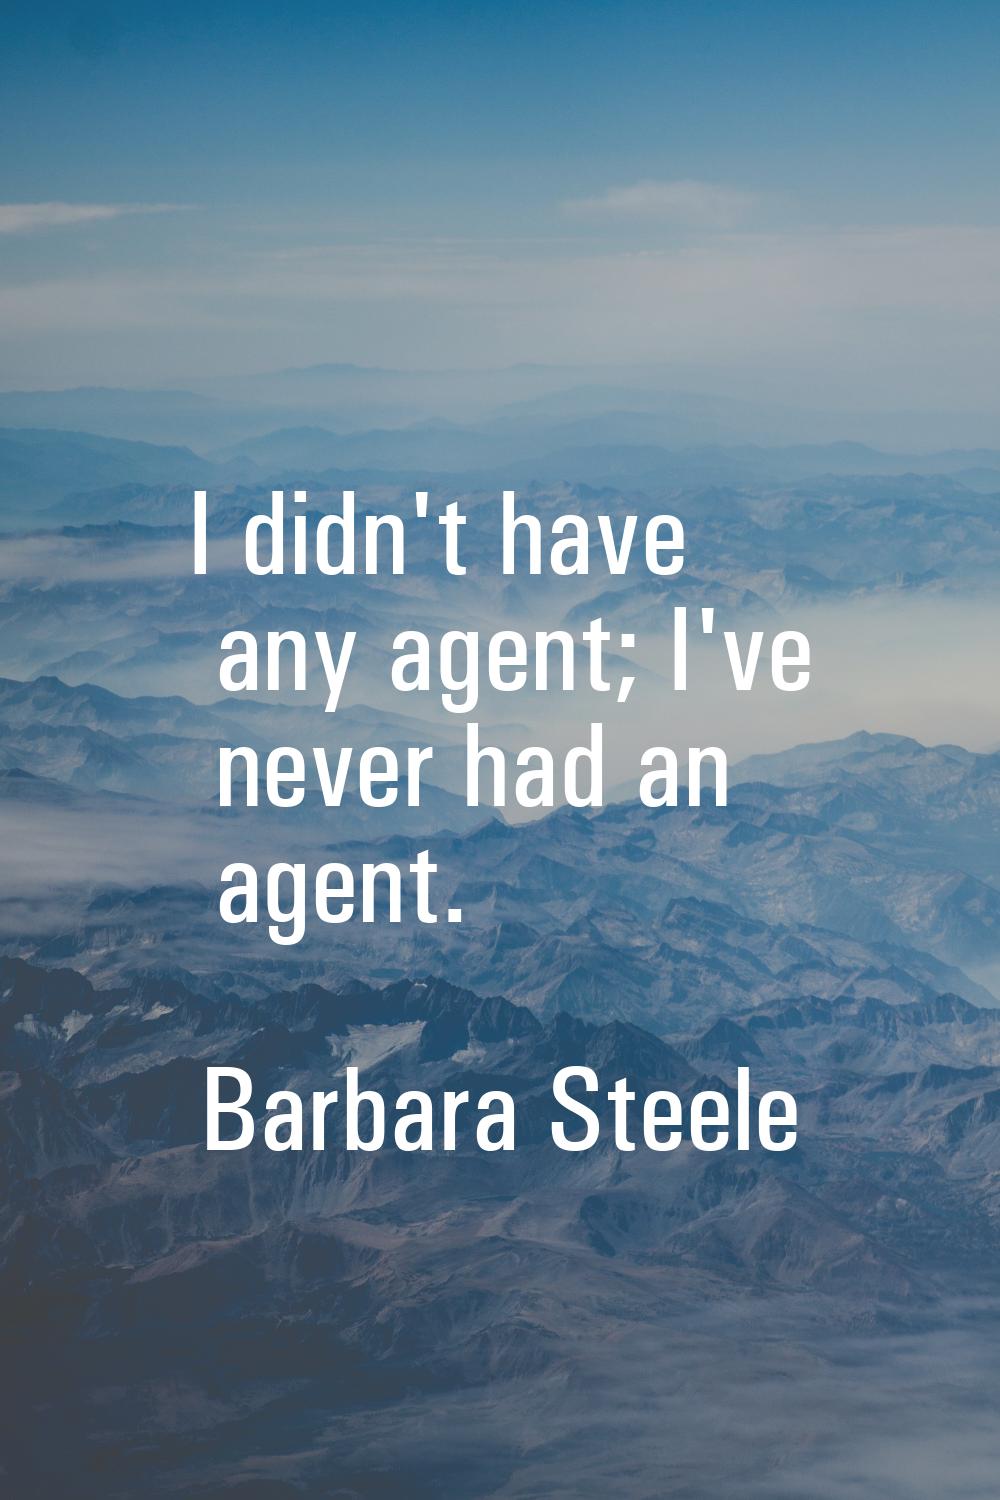 I didn't have any agent; I've never had an agent.